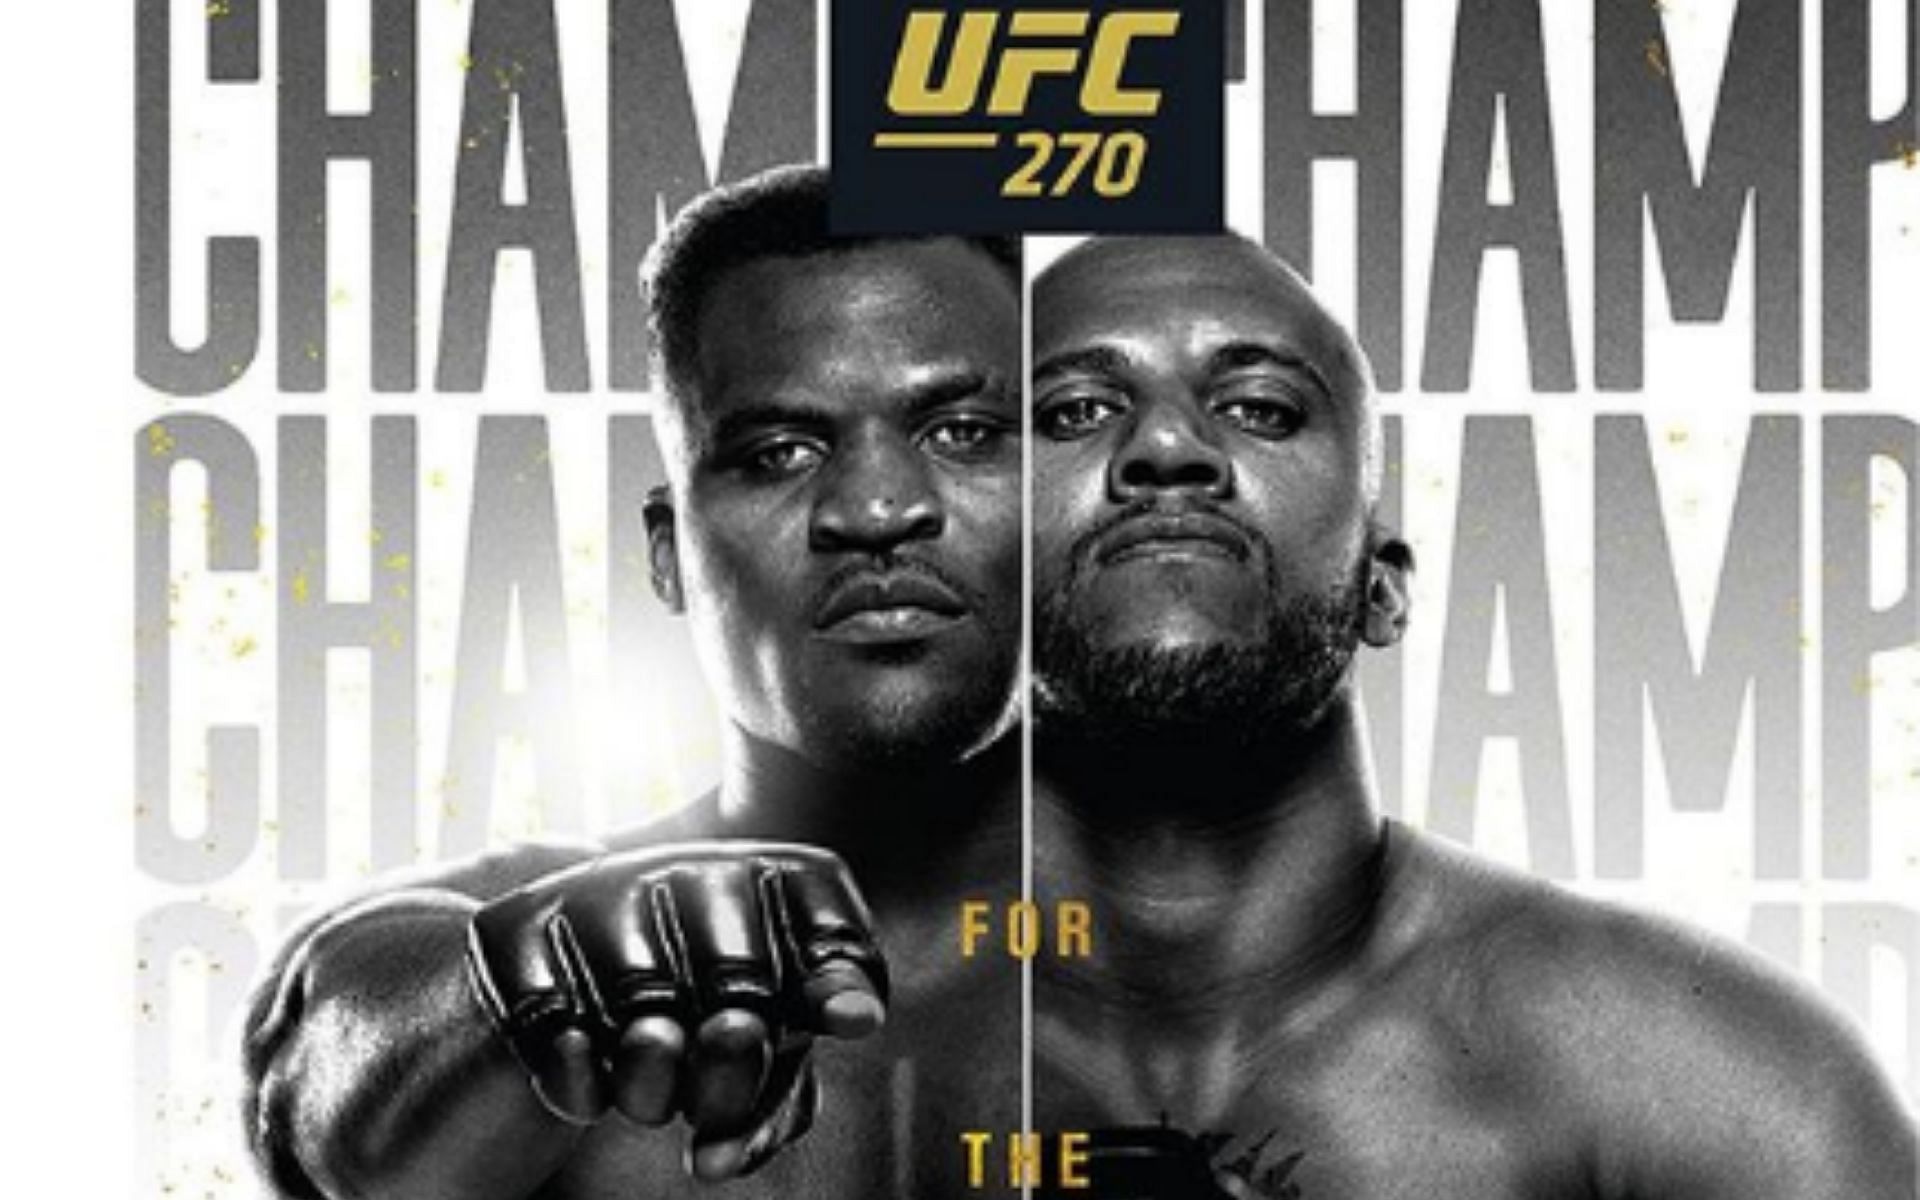 Francis Ngannou (left) will defend his UFC heavyweight championship against Ciryl Gane at UFC 270 [Image Credit: @ufc on Instagram]